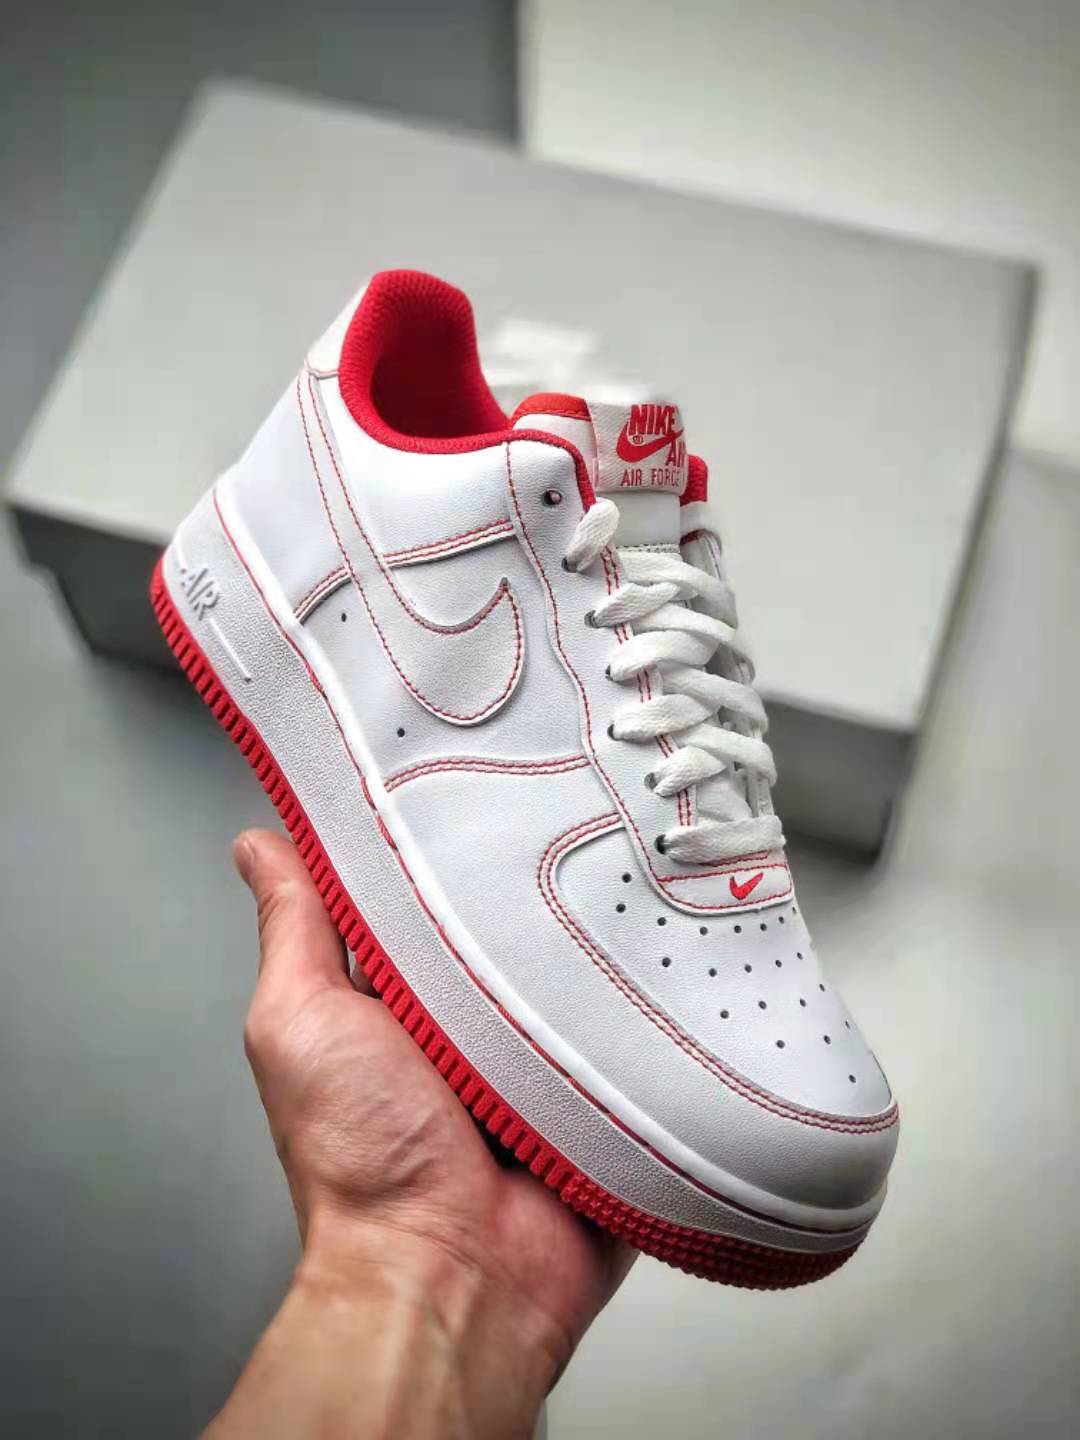 Nike Air Force 1 '07 'Contrast Stitch - White University Red' CV1724-100 | Limited Edition